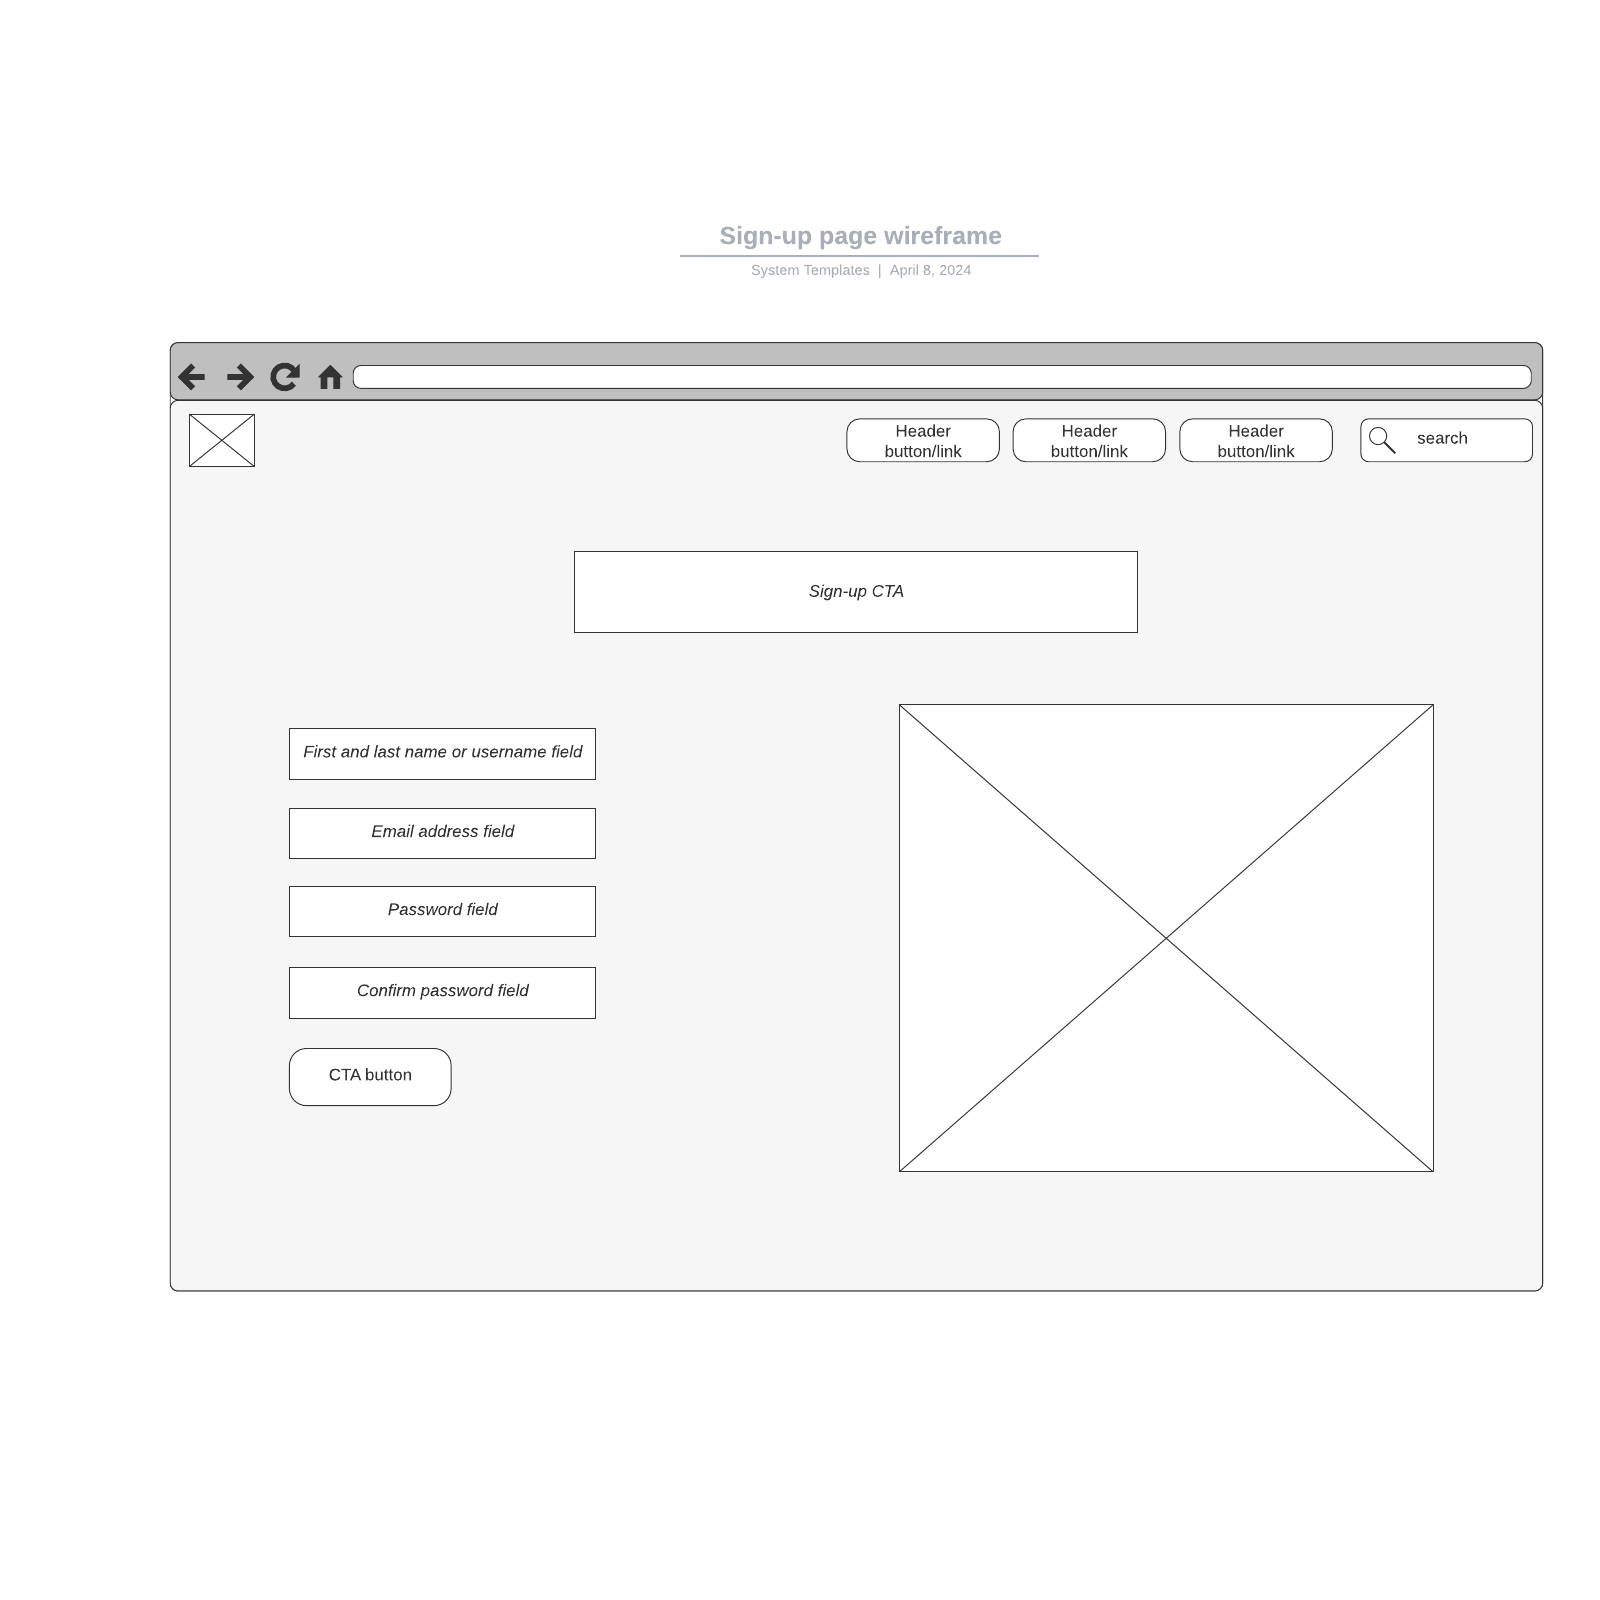 Sign-up page wireframe example